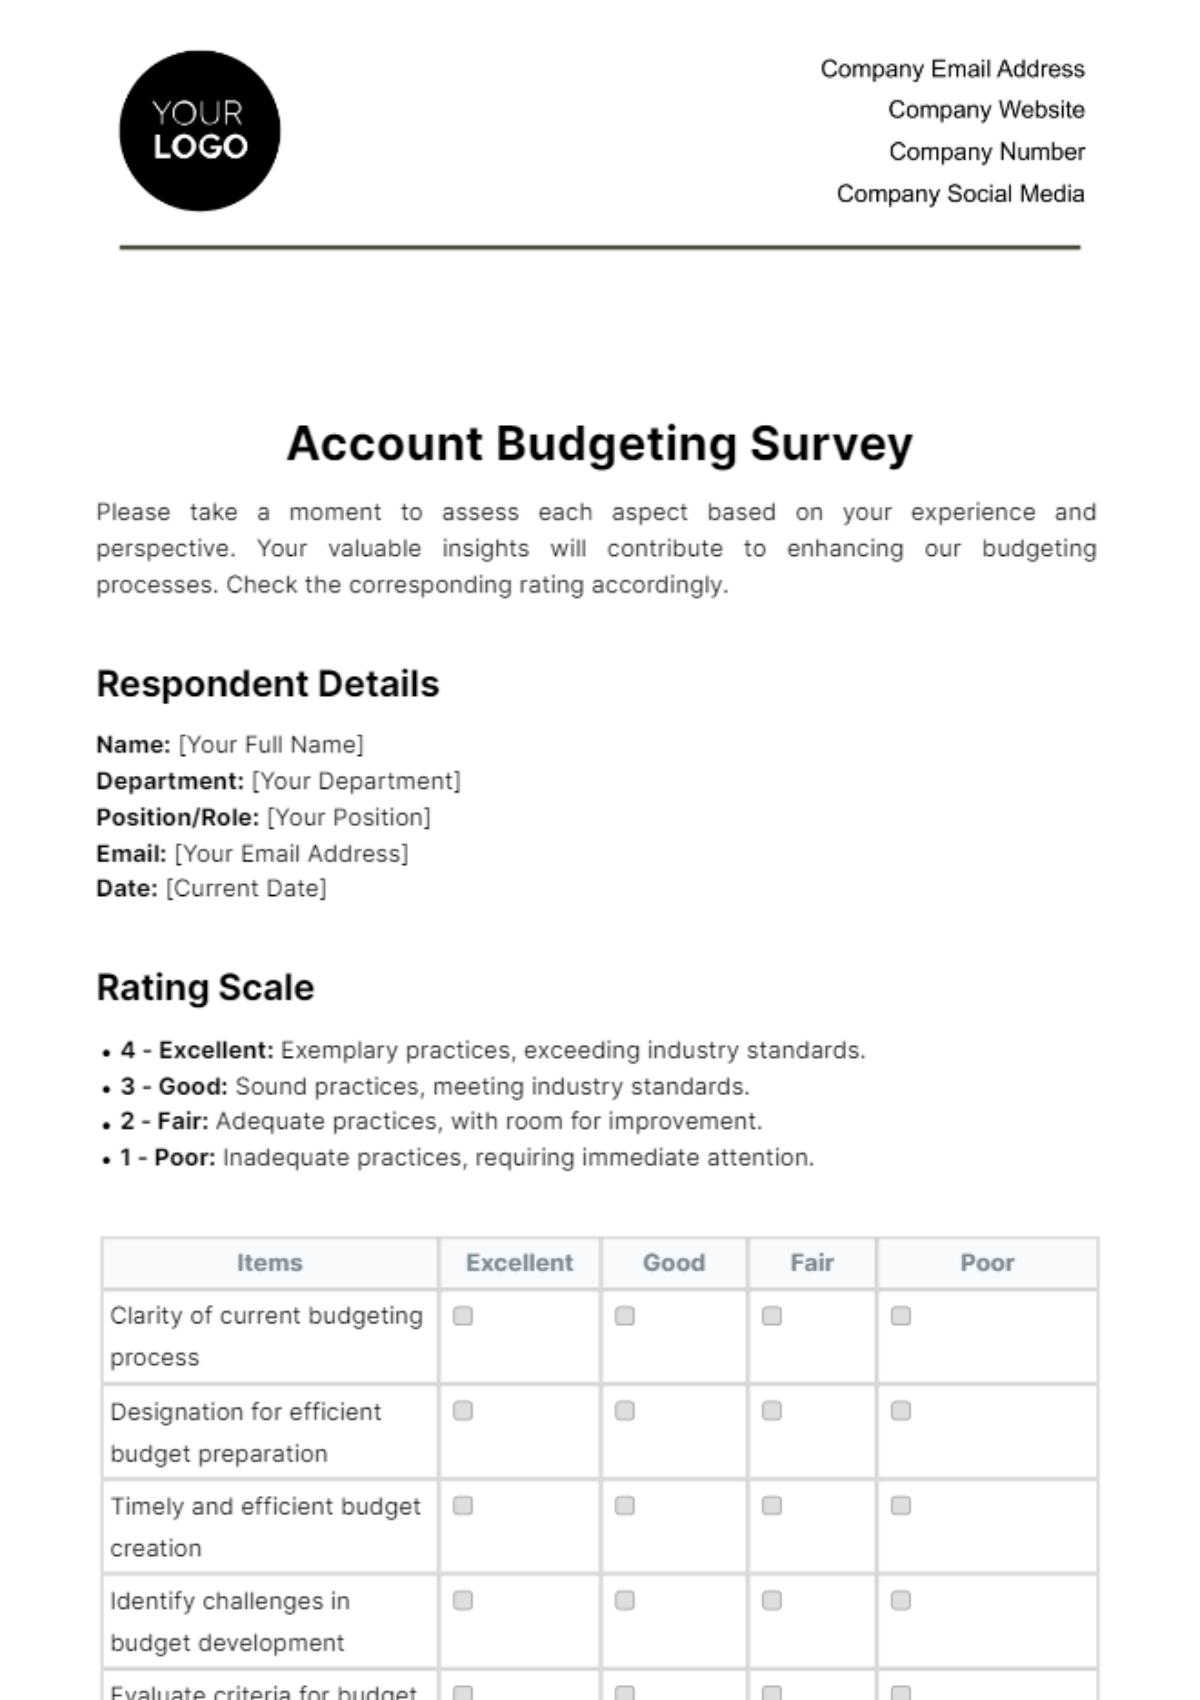 Account Budgeting Survey Template